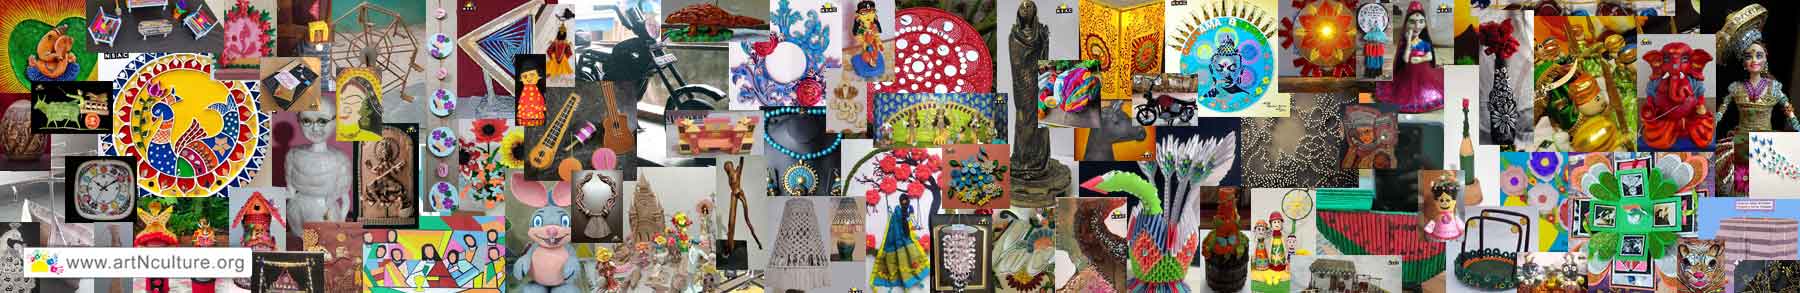 All India Craft Competition - Shilp Aakar